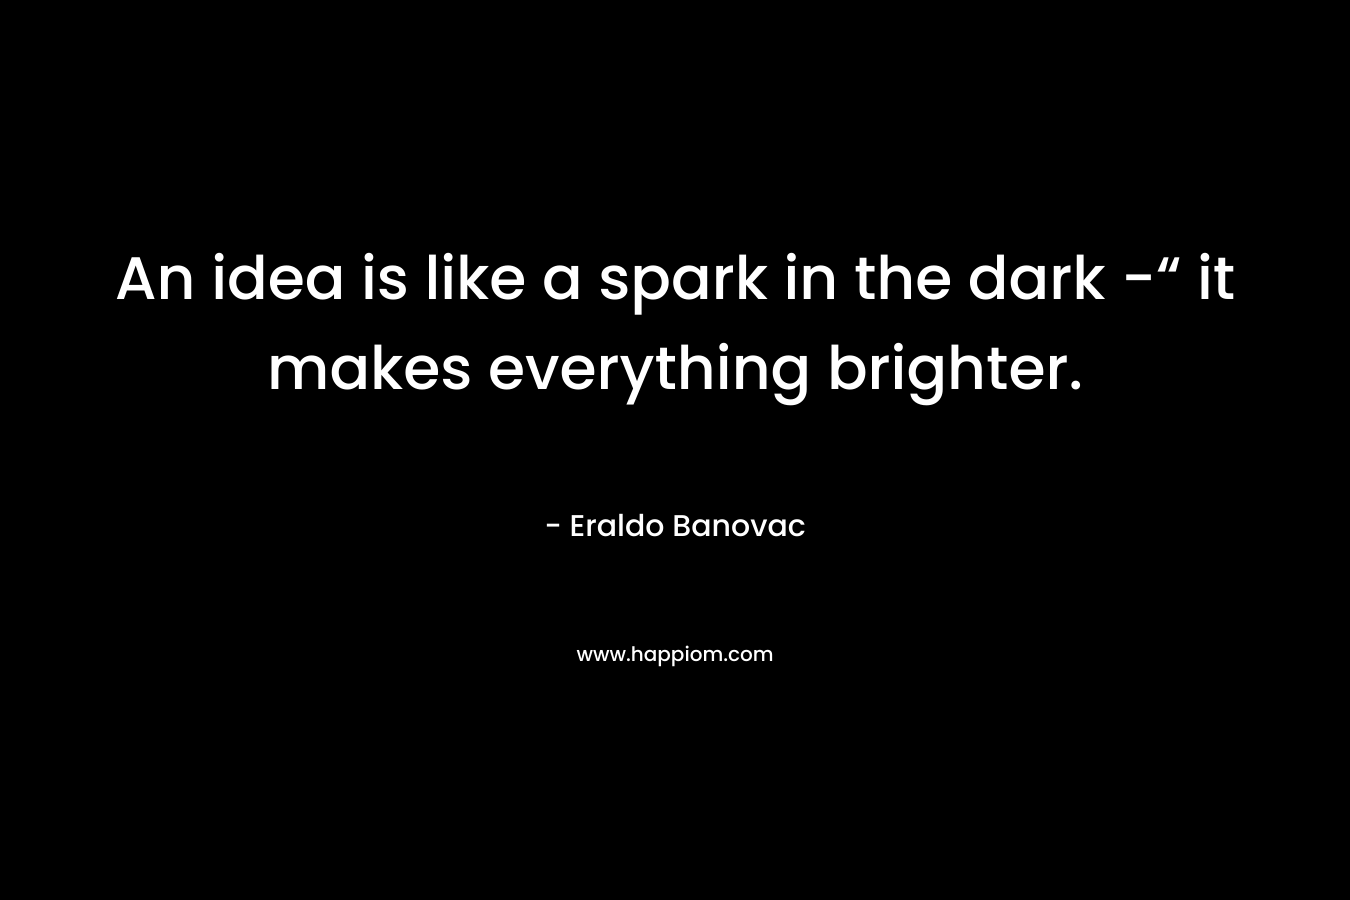 An idea is like a spark in the dark -“ it makes everything brighter. – Eraldo Banovac